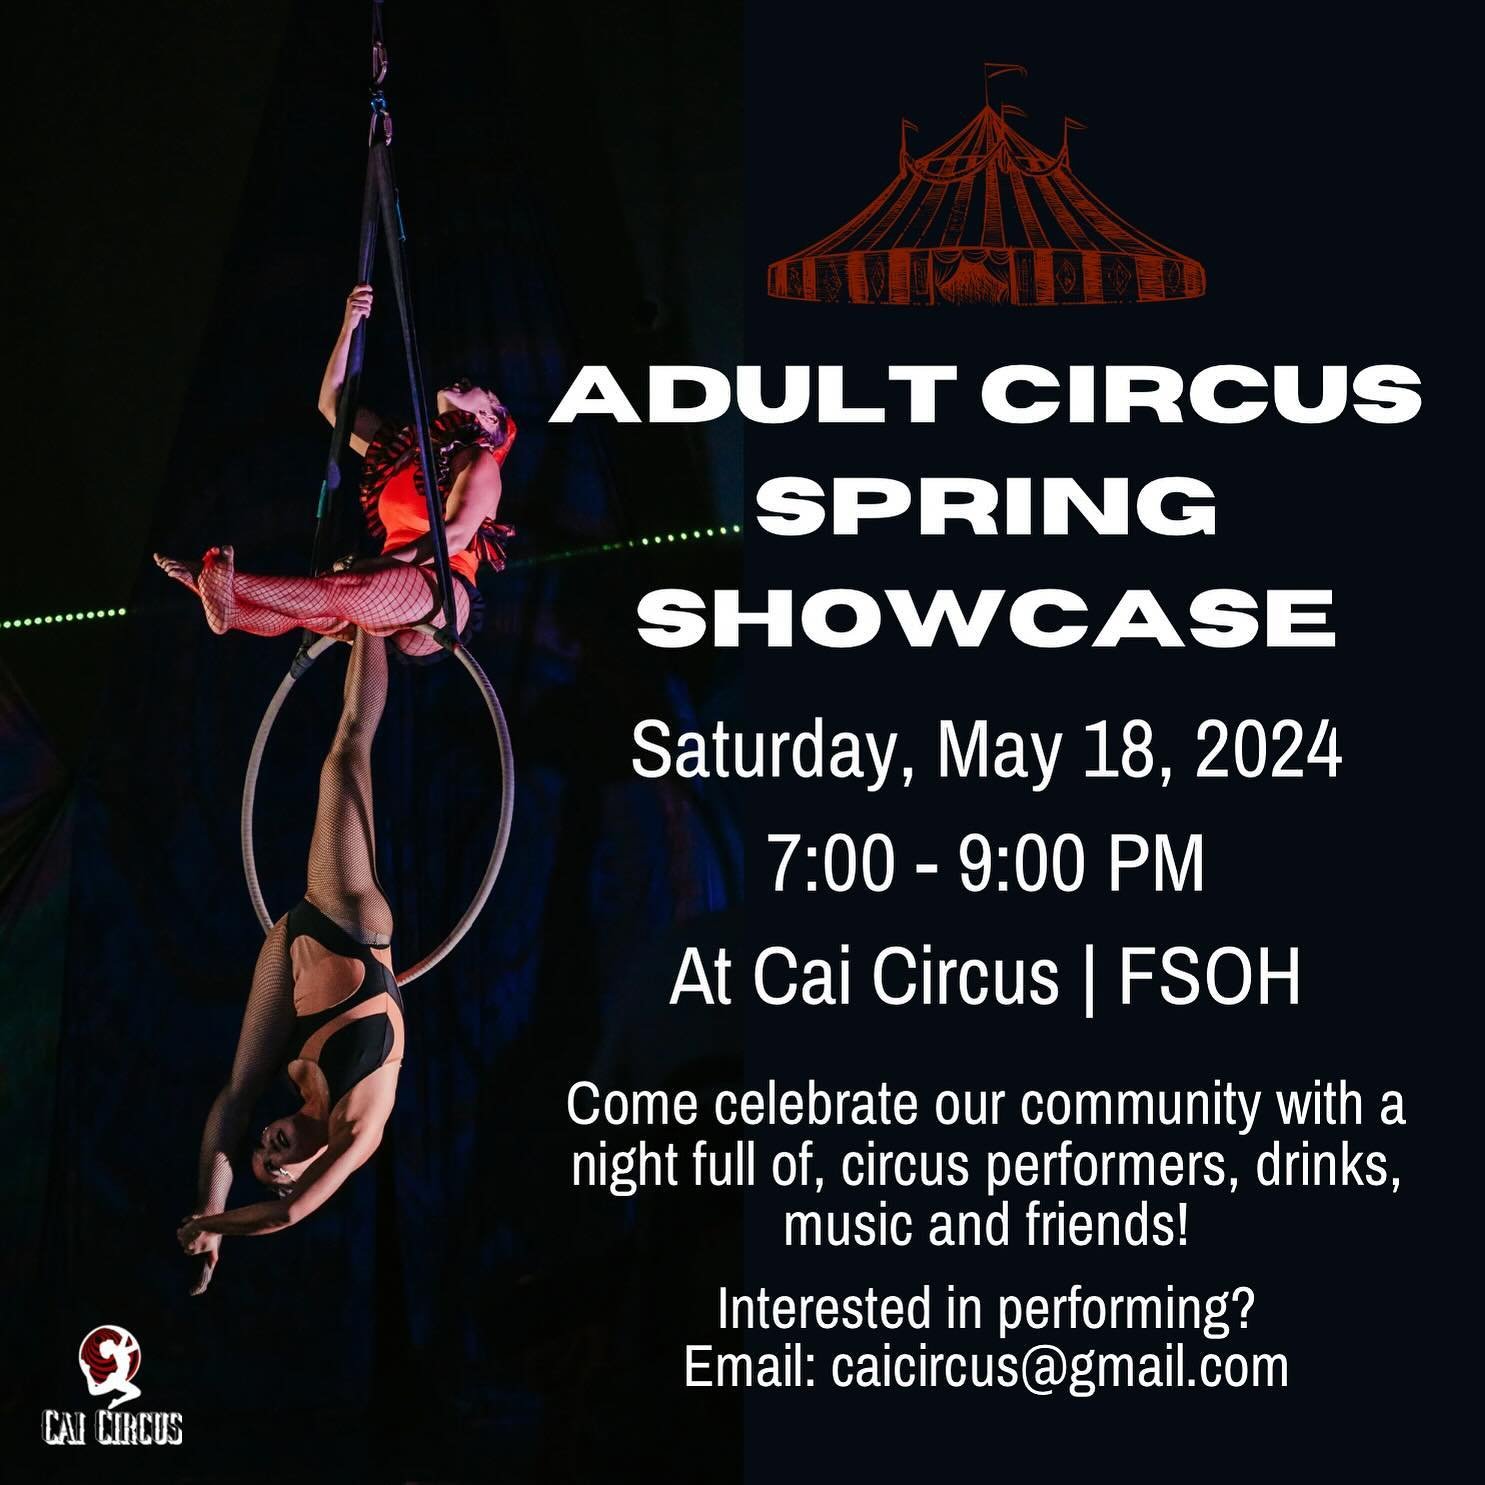 IN LESS THAN TWO WEEKS! Come out and support your local circus and community. Please share and invite your friends and family- it&rsquo;s going to be a great party with music, live performances, drinks and community! Ticket link in bio 🎪✨🎟️
-
#caic